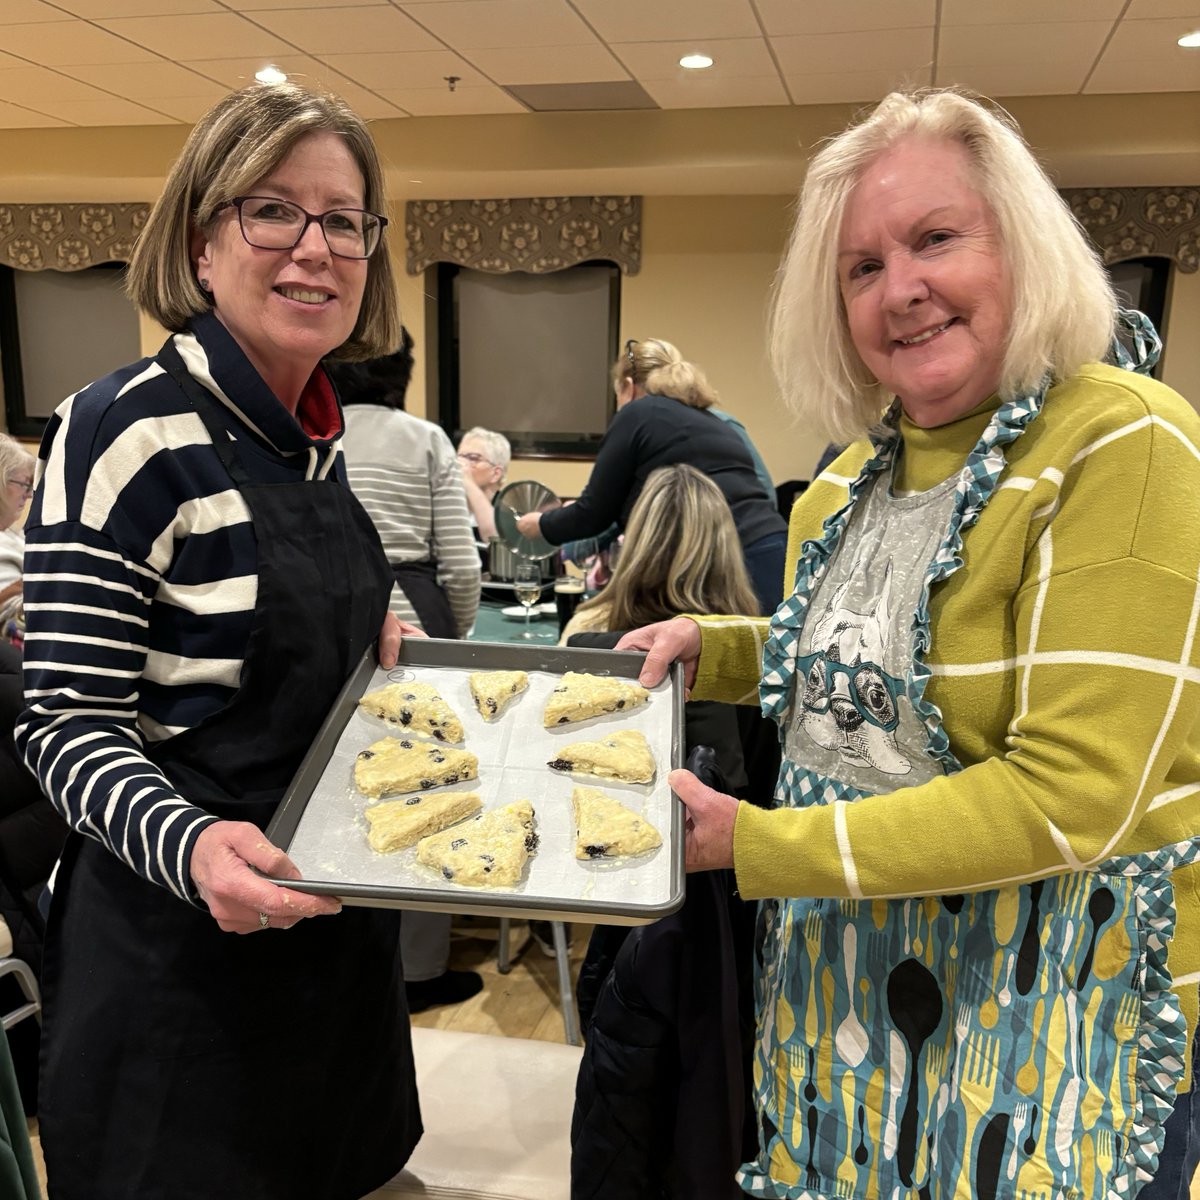 We had a blast this past Thursday with @bostonbakeology for the Irish Breads & Soup Cookery Class! Thank you to everyone who joined! Stay tuned for updates on upcoming classes in April and May! #cookingclasses #baking #irishfood #irish #bostonirish #ICCBoston